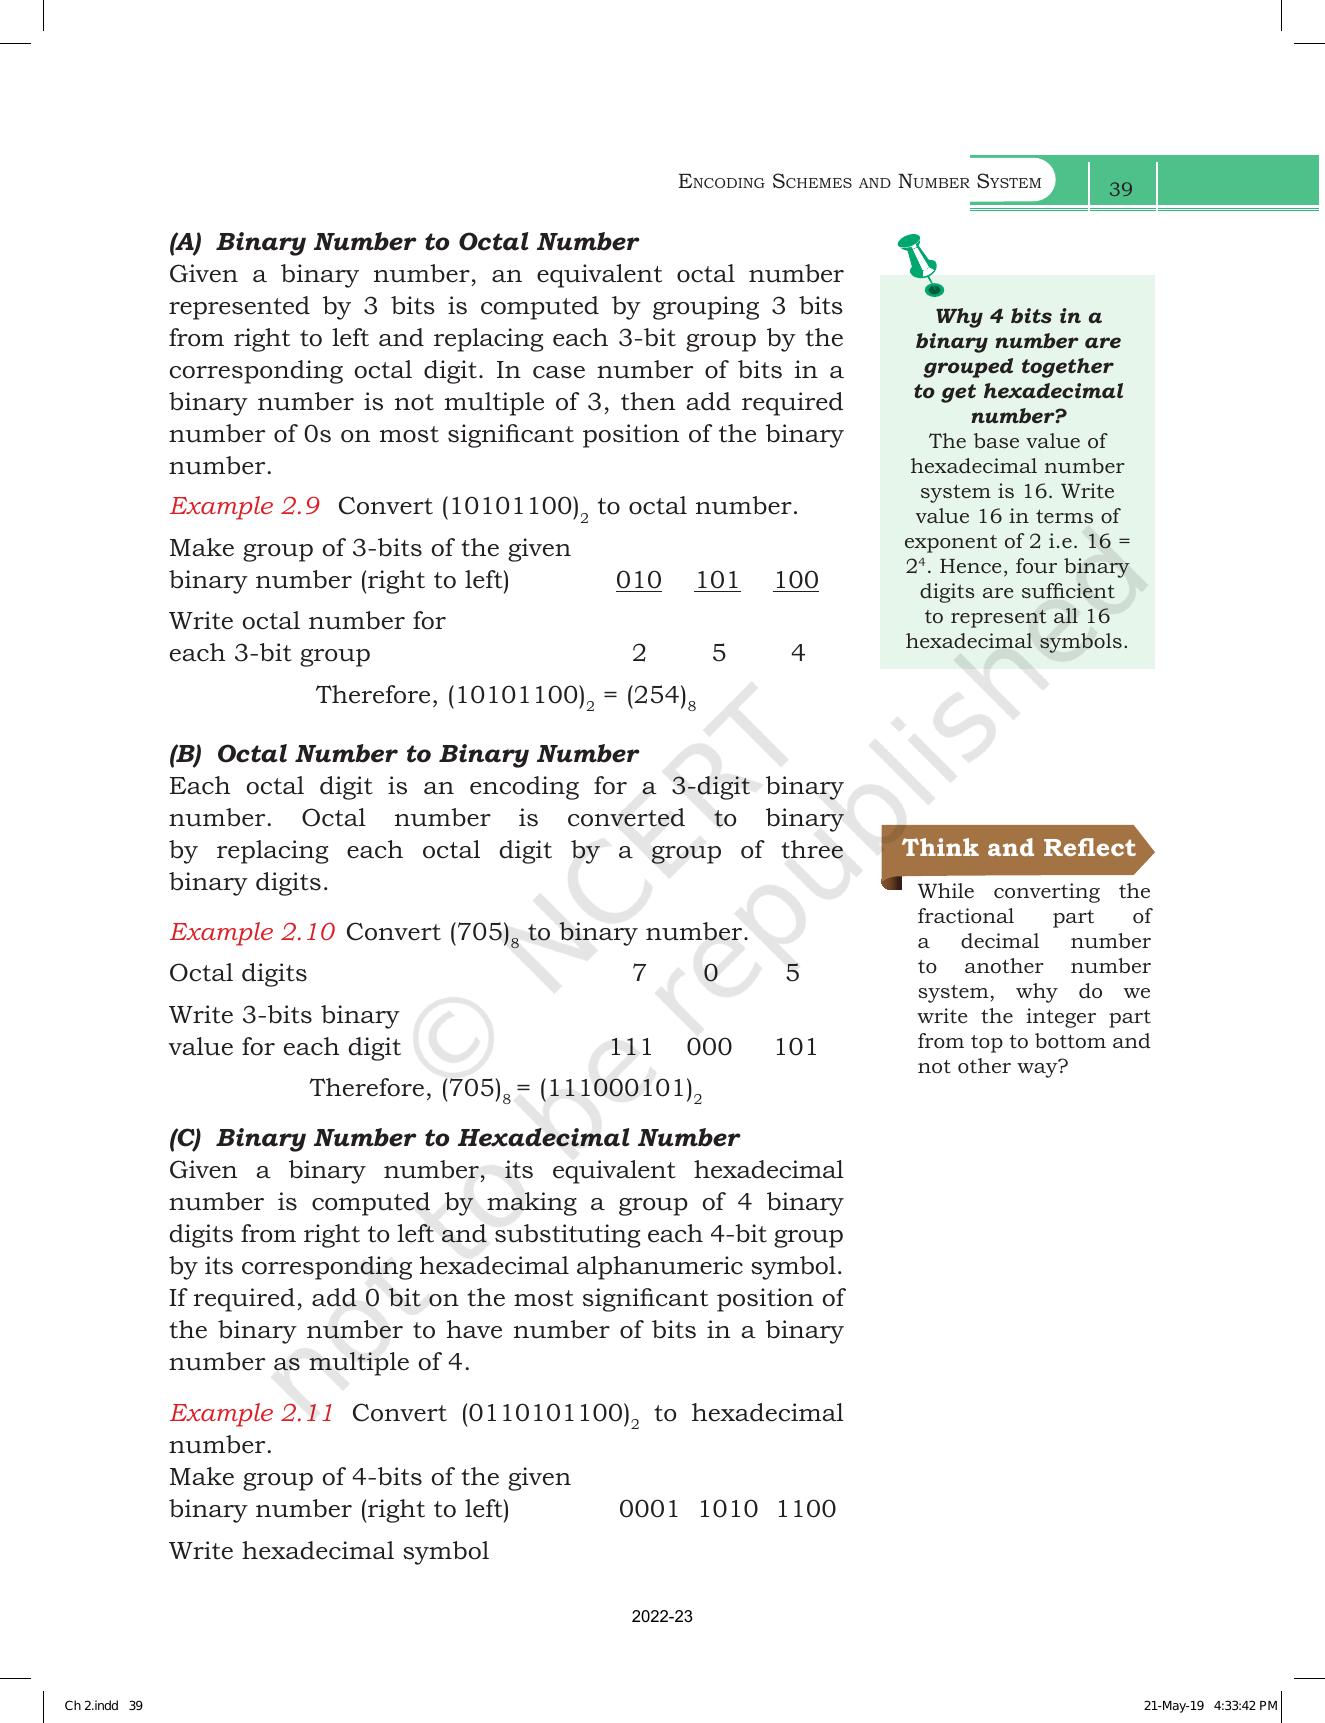 NCERT Book for Class 11 Computer Science Chapter 2 Encoding Schemes and Number System - Page 13